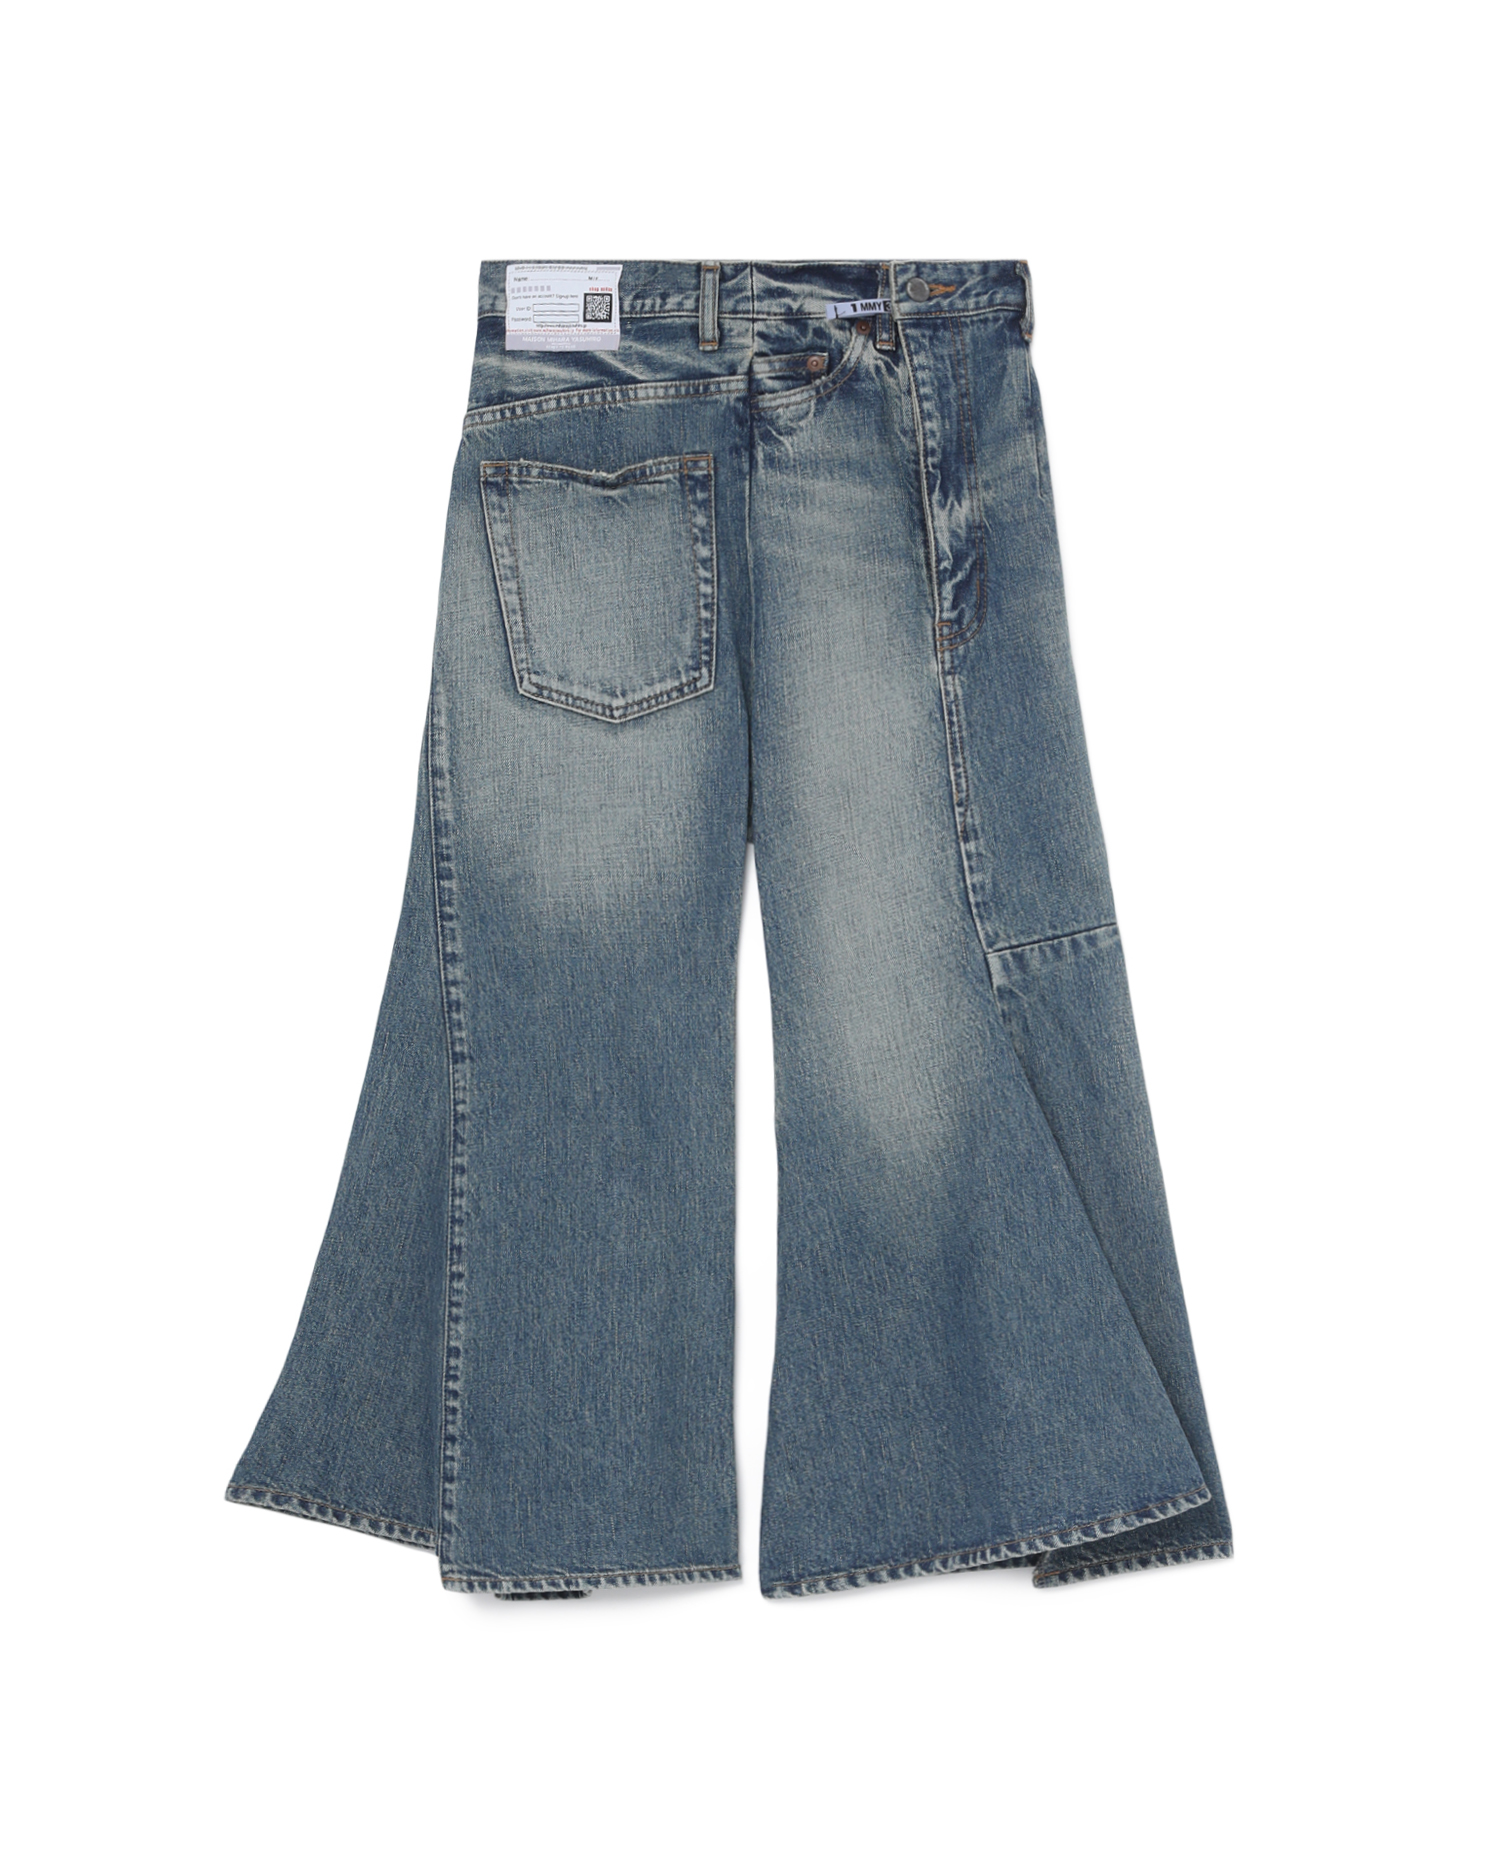 Deconstructed super flare jeans